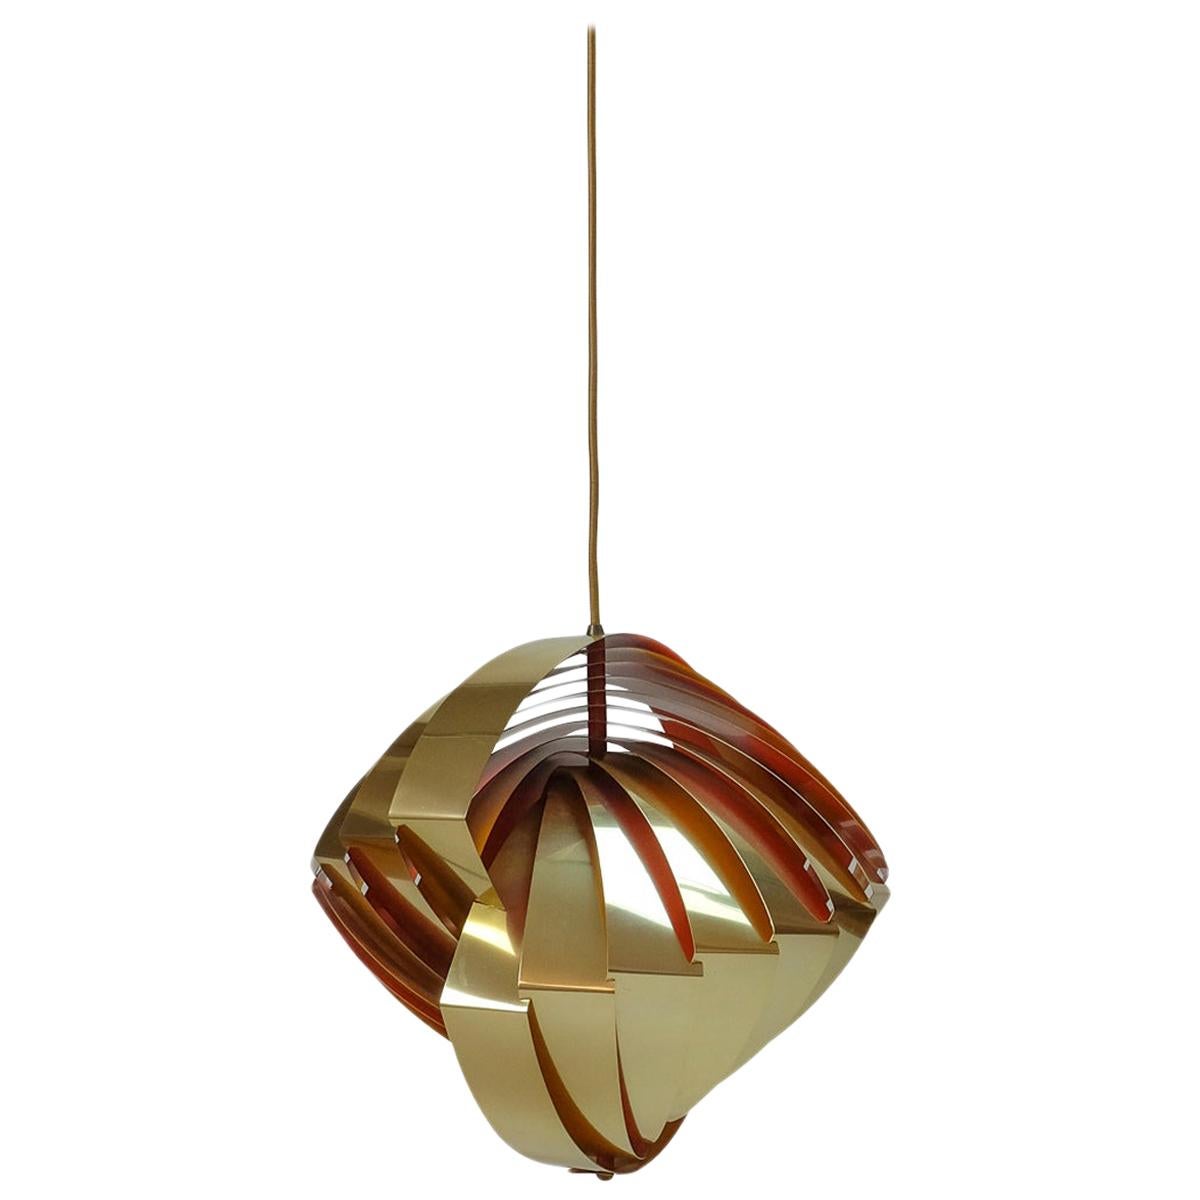 The Konkylie ceiling lamp was designed by Louis Weisdorf and produced by Lyfa in Denmark during the 1960s.

The gold-colored blades have an orange interior, which produces a warm glow. They are installed in such a way that you never look directly